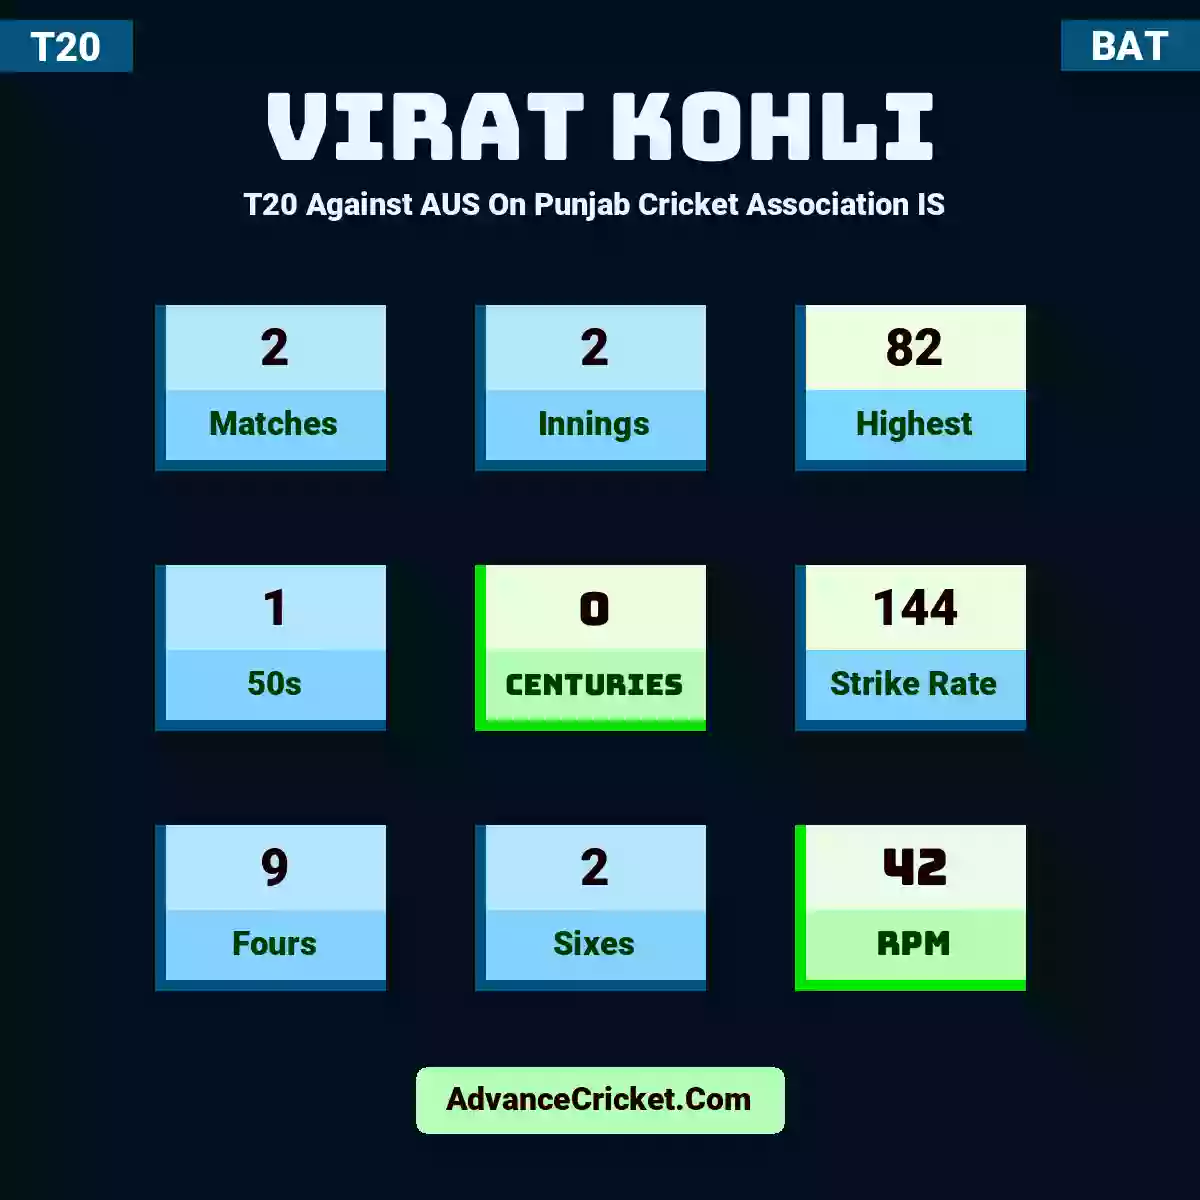 Virat Kohli T20  Against AUS On Punjab Cricket Association IS , Virat Kohli played 2 matches, scored 82 runs as highest, 1 half-centuries, and 0 centuries, with a strike rate of 144. V.Kohli hit 9 fours and 2 sixes, with an RPM of 42.